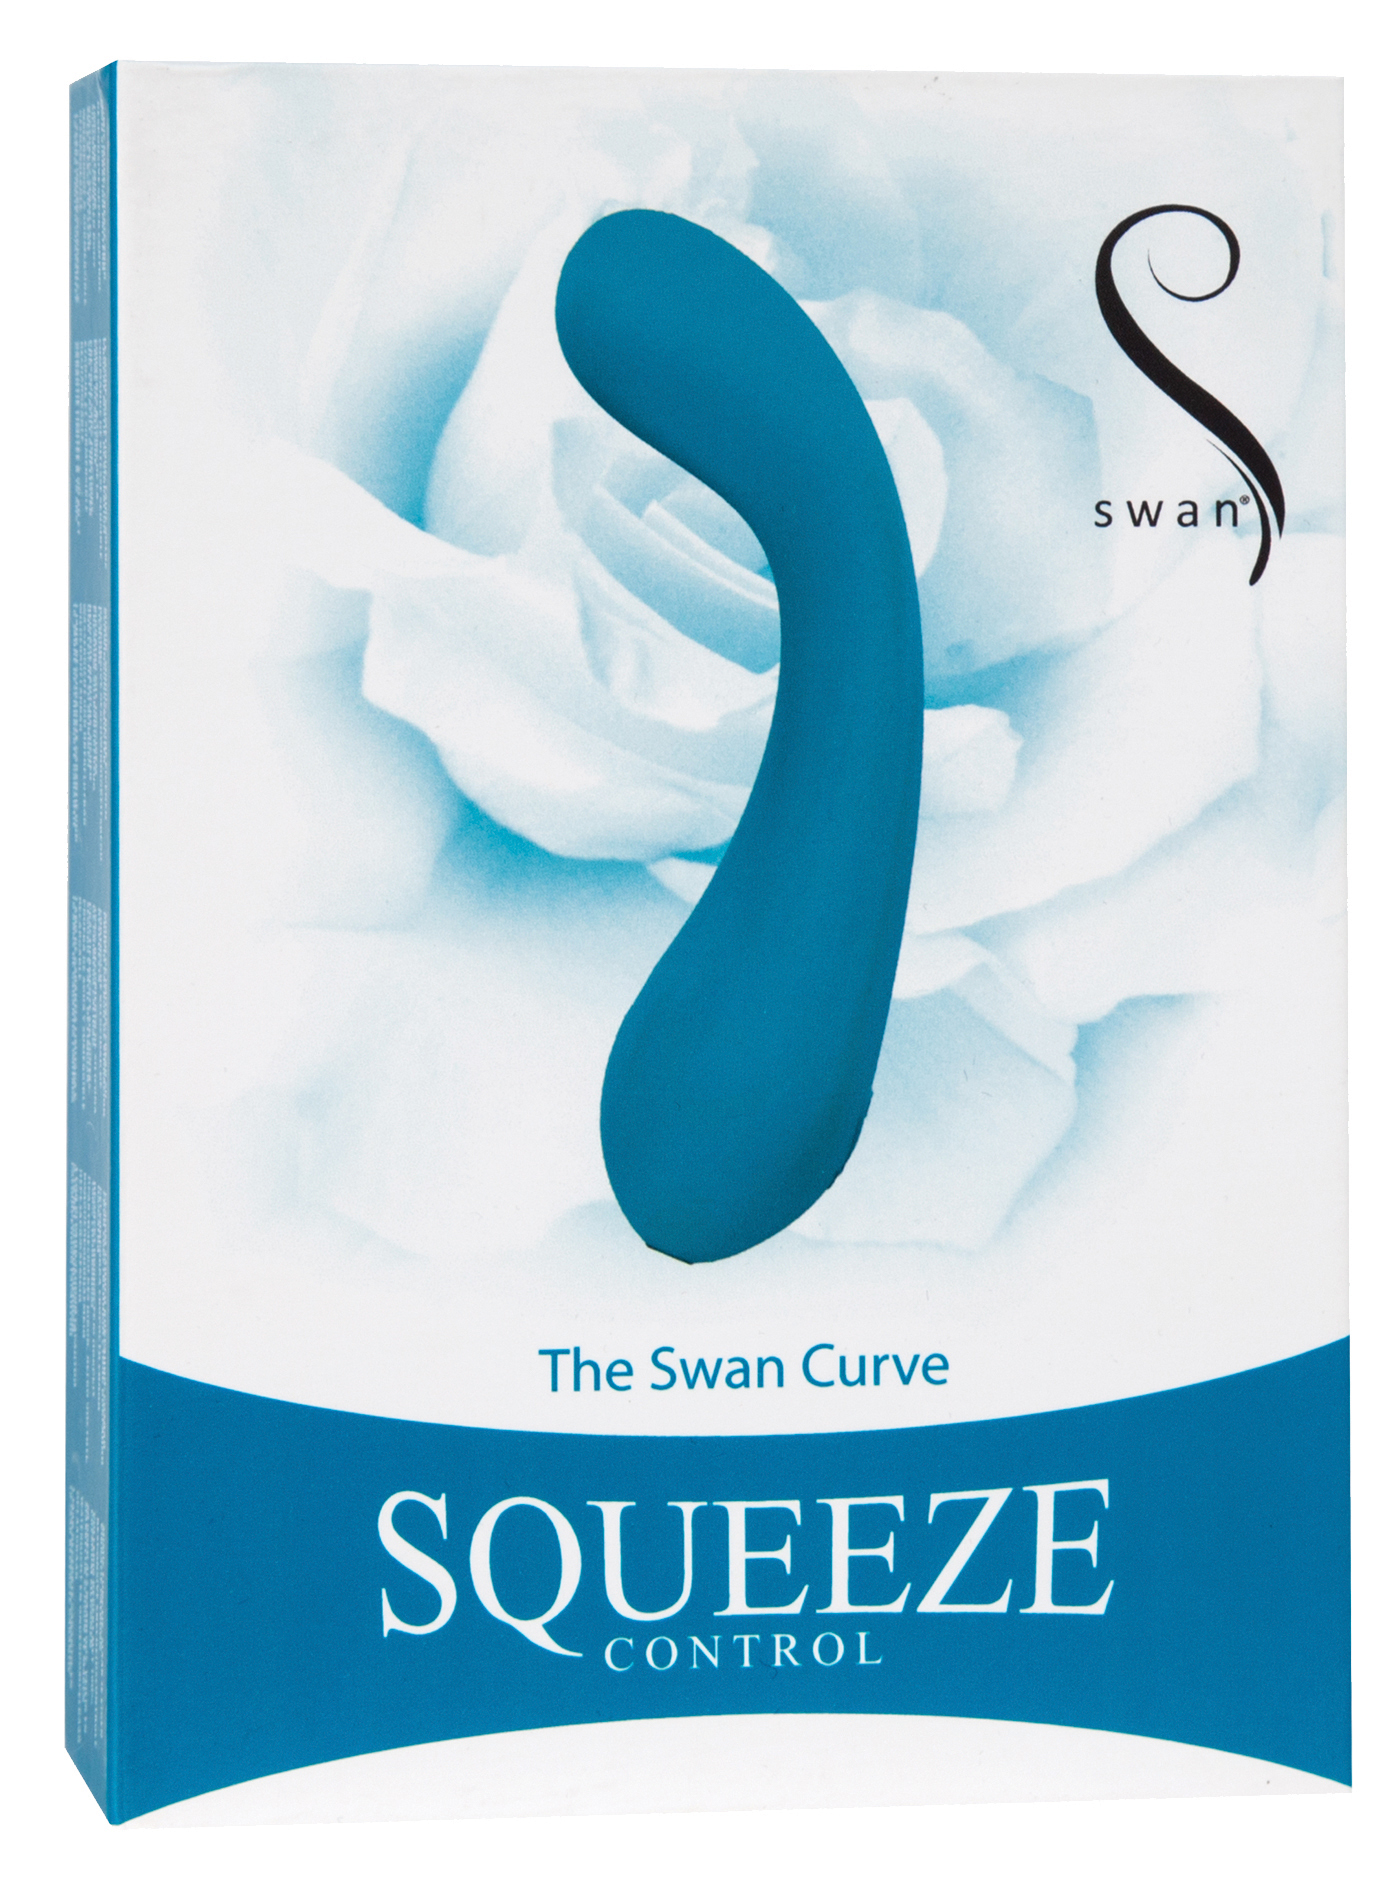 SQUEEZE CONTROL - The Swan Curve teal